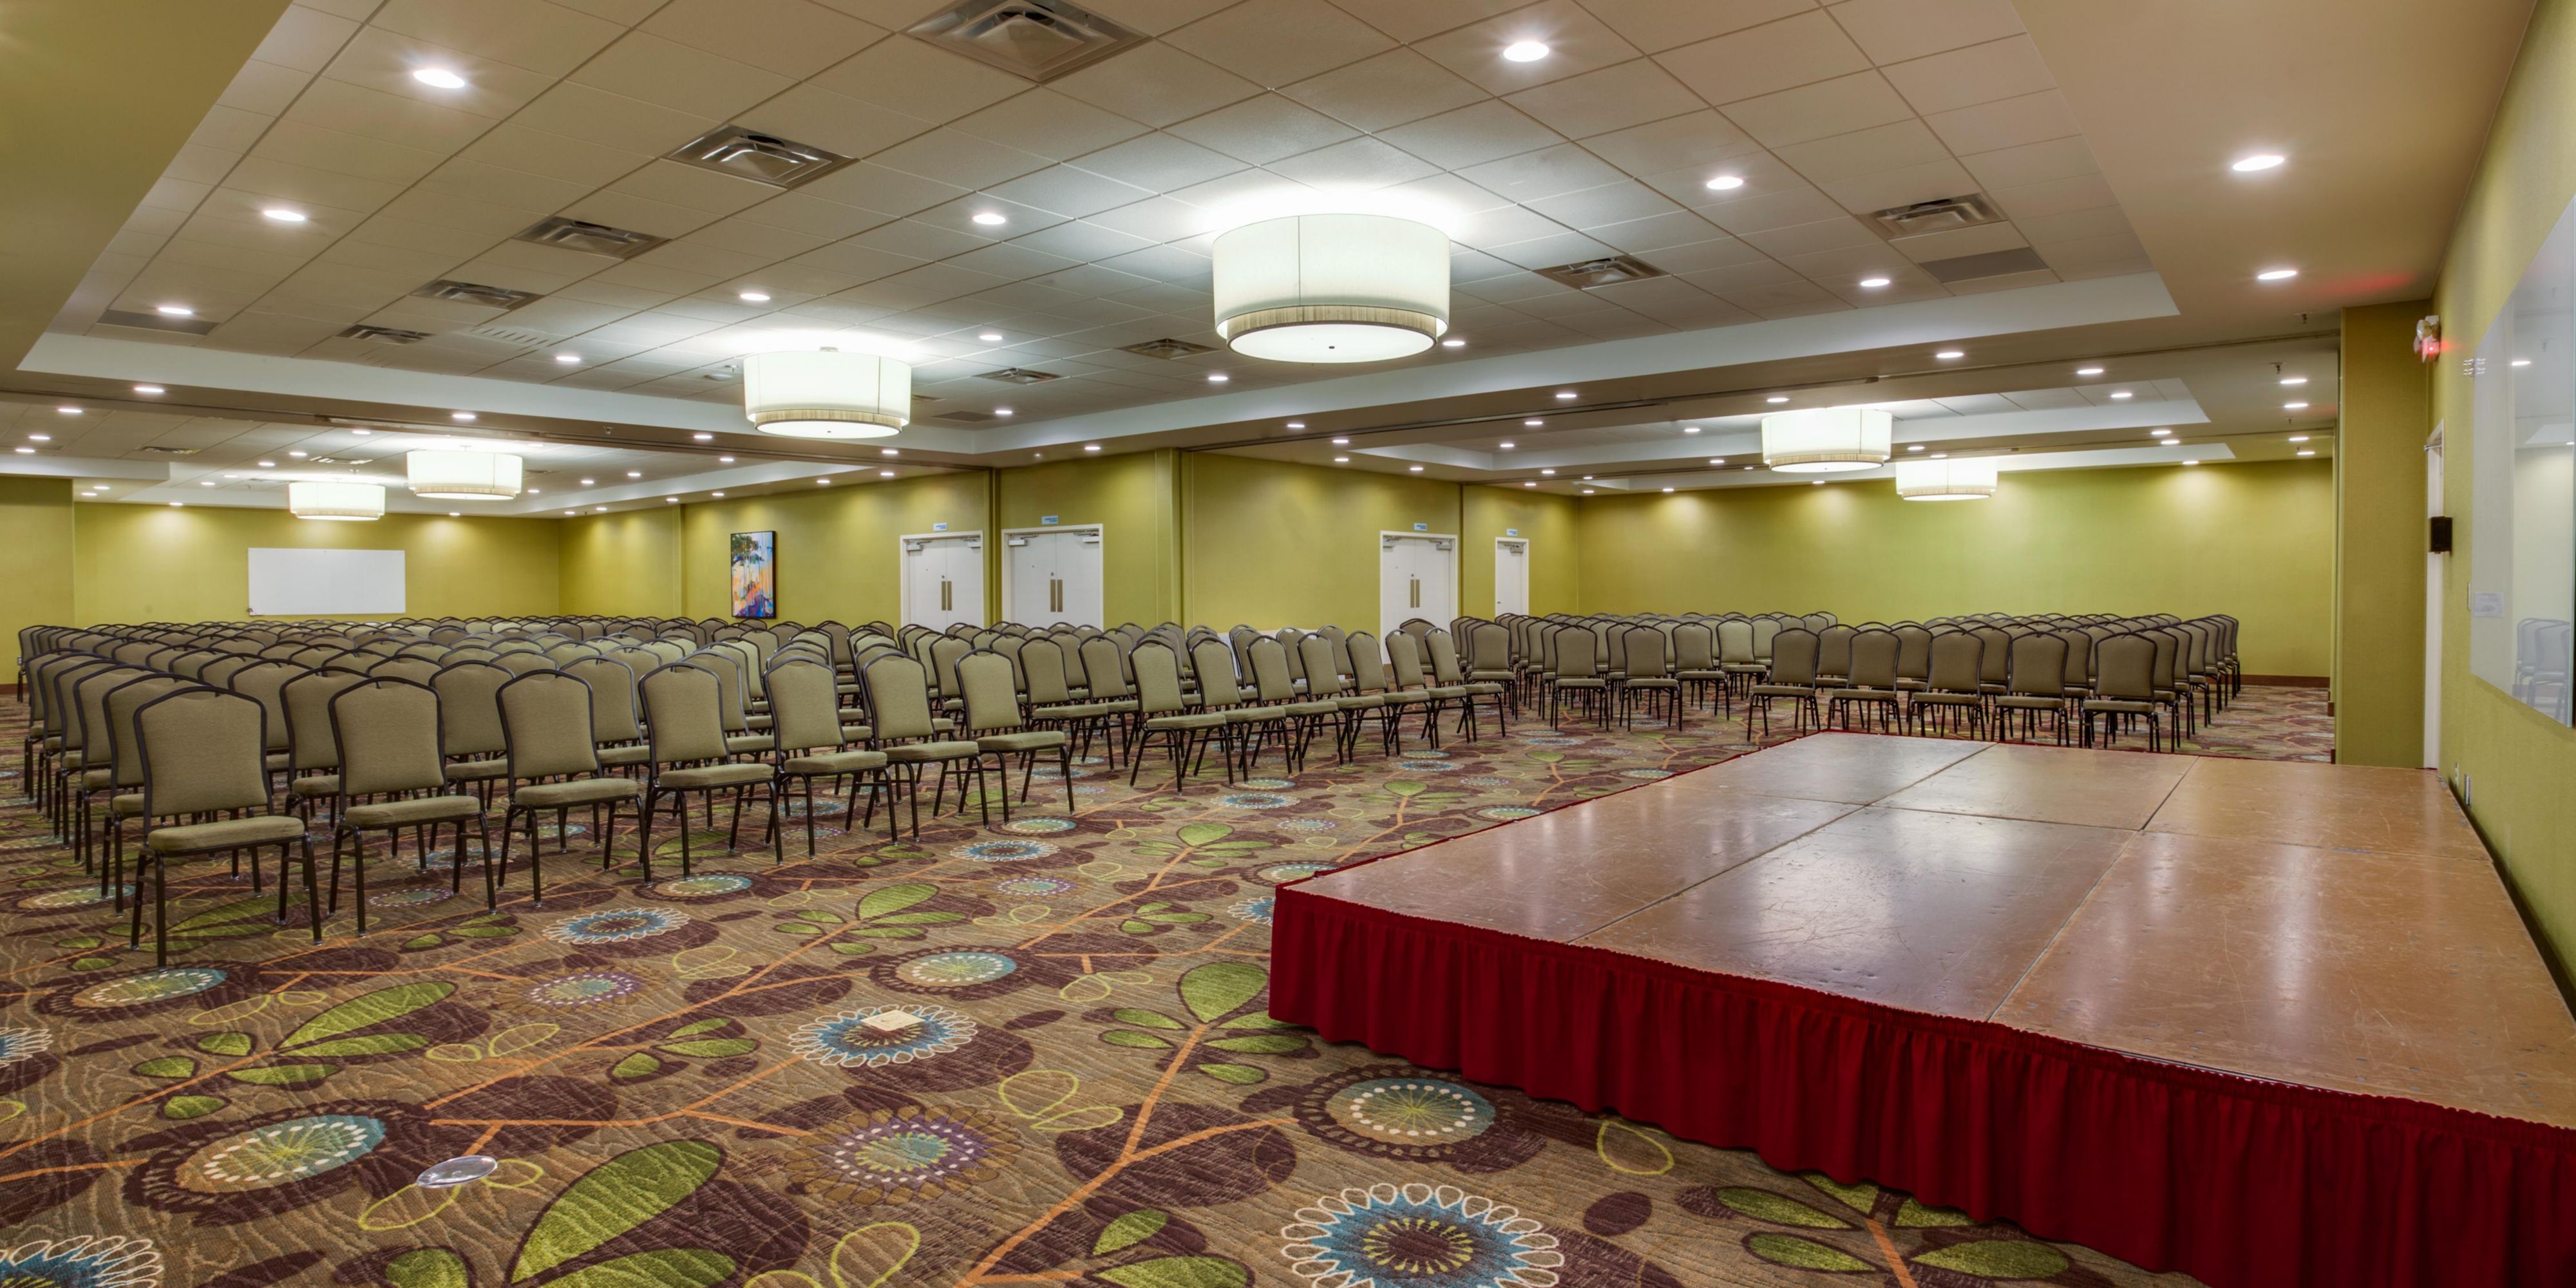 Offering up to 5,000 square feet meeting space, the Yadkin Valley Event Center is ideal for business retreats, conferences, trade shows, grand weddings, concerts, reunions, conventions and important events. Retractable wall partitions allow flexibility for events of all sizes.